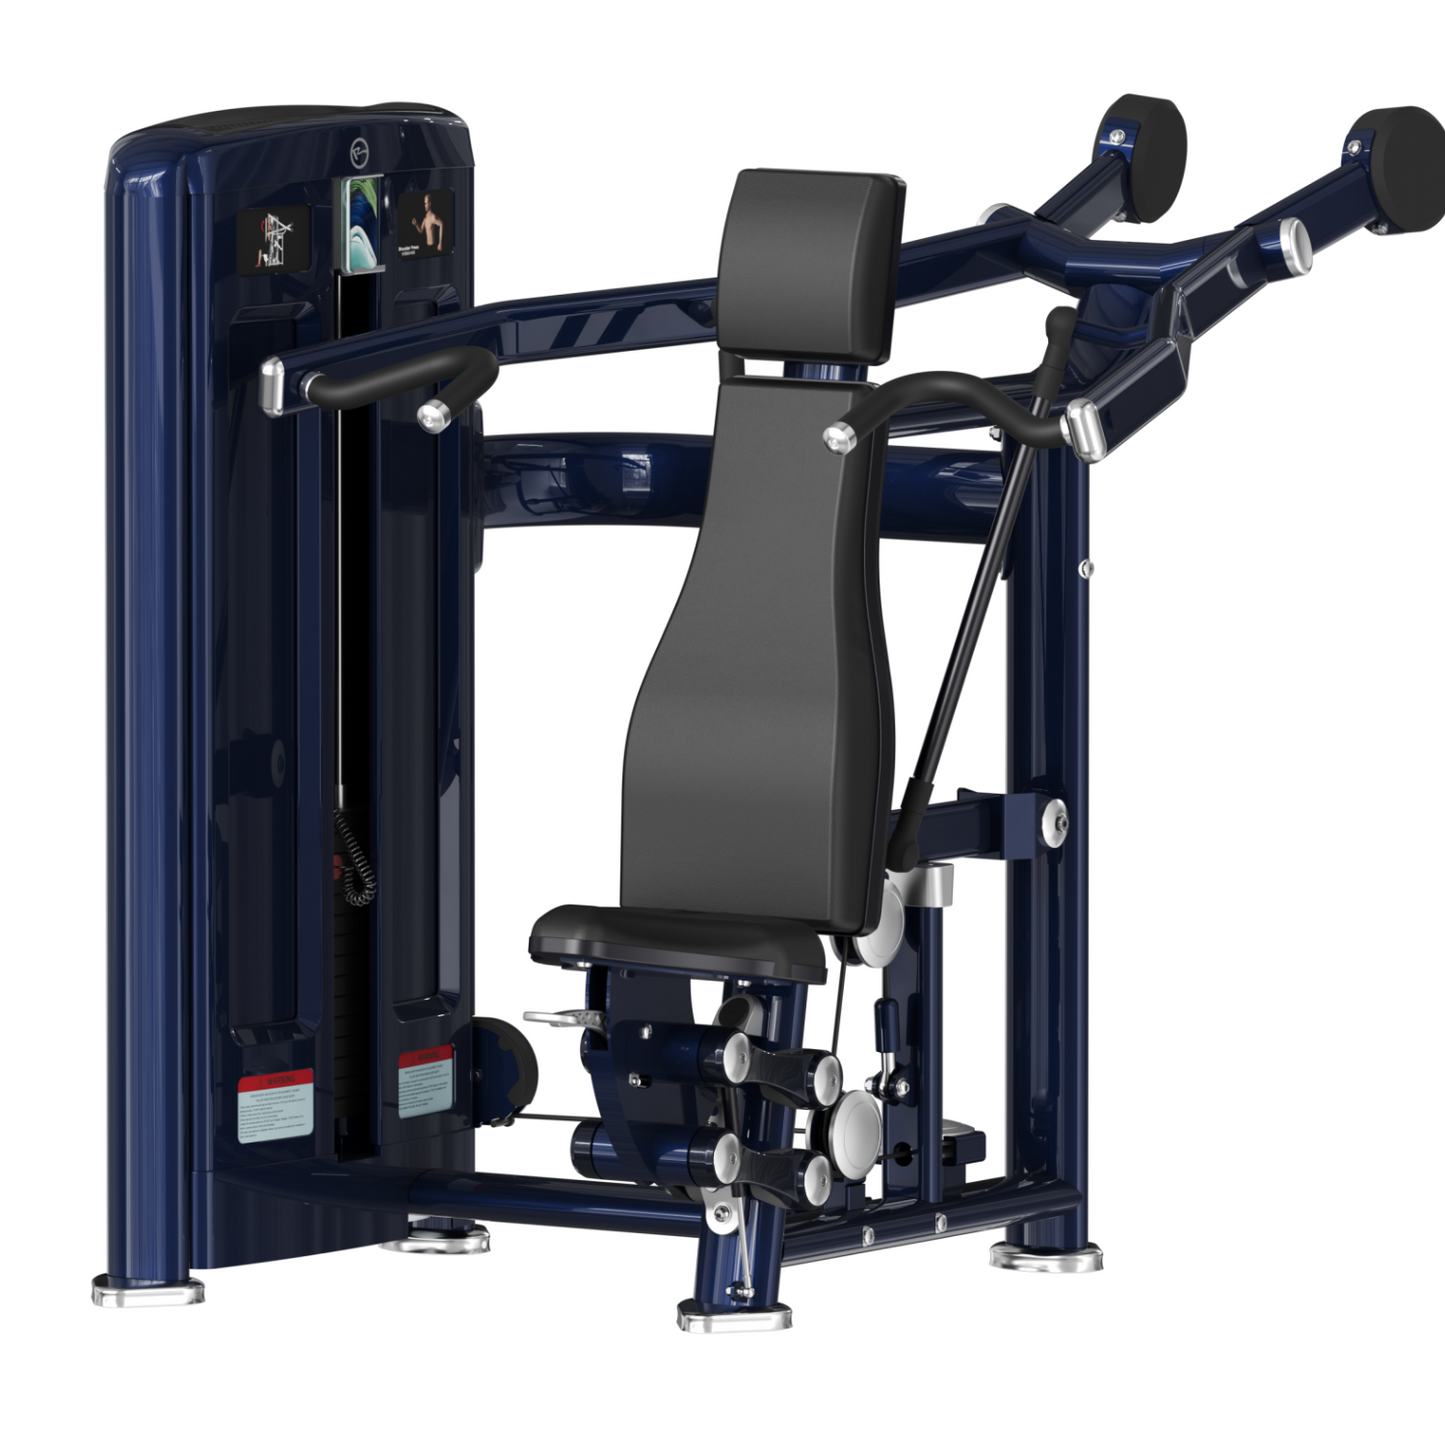 Realleader USA XRM71003 Commercial Seated Shoulder Press